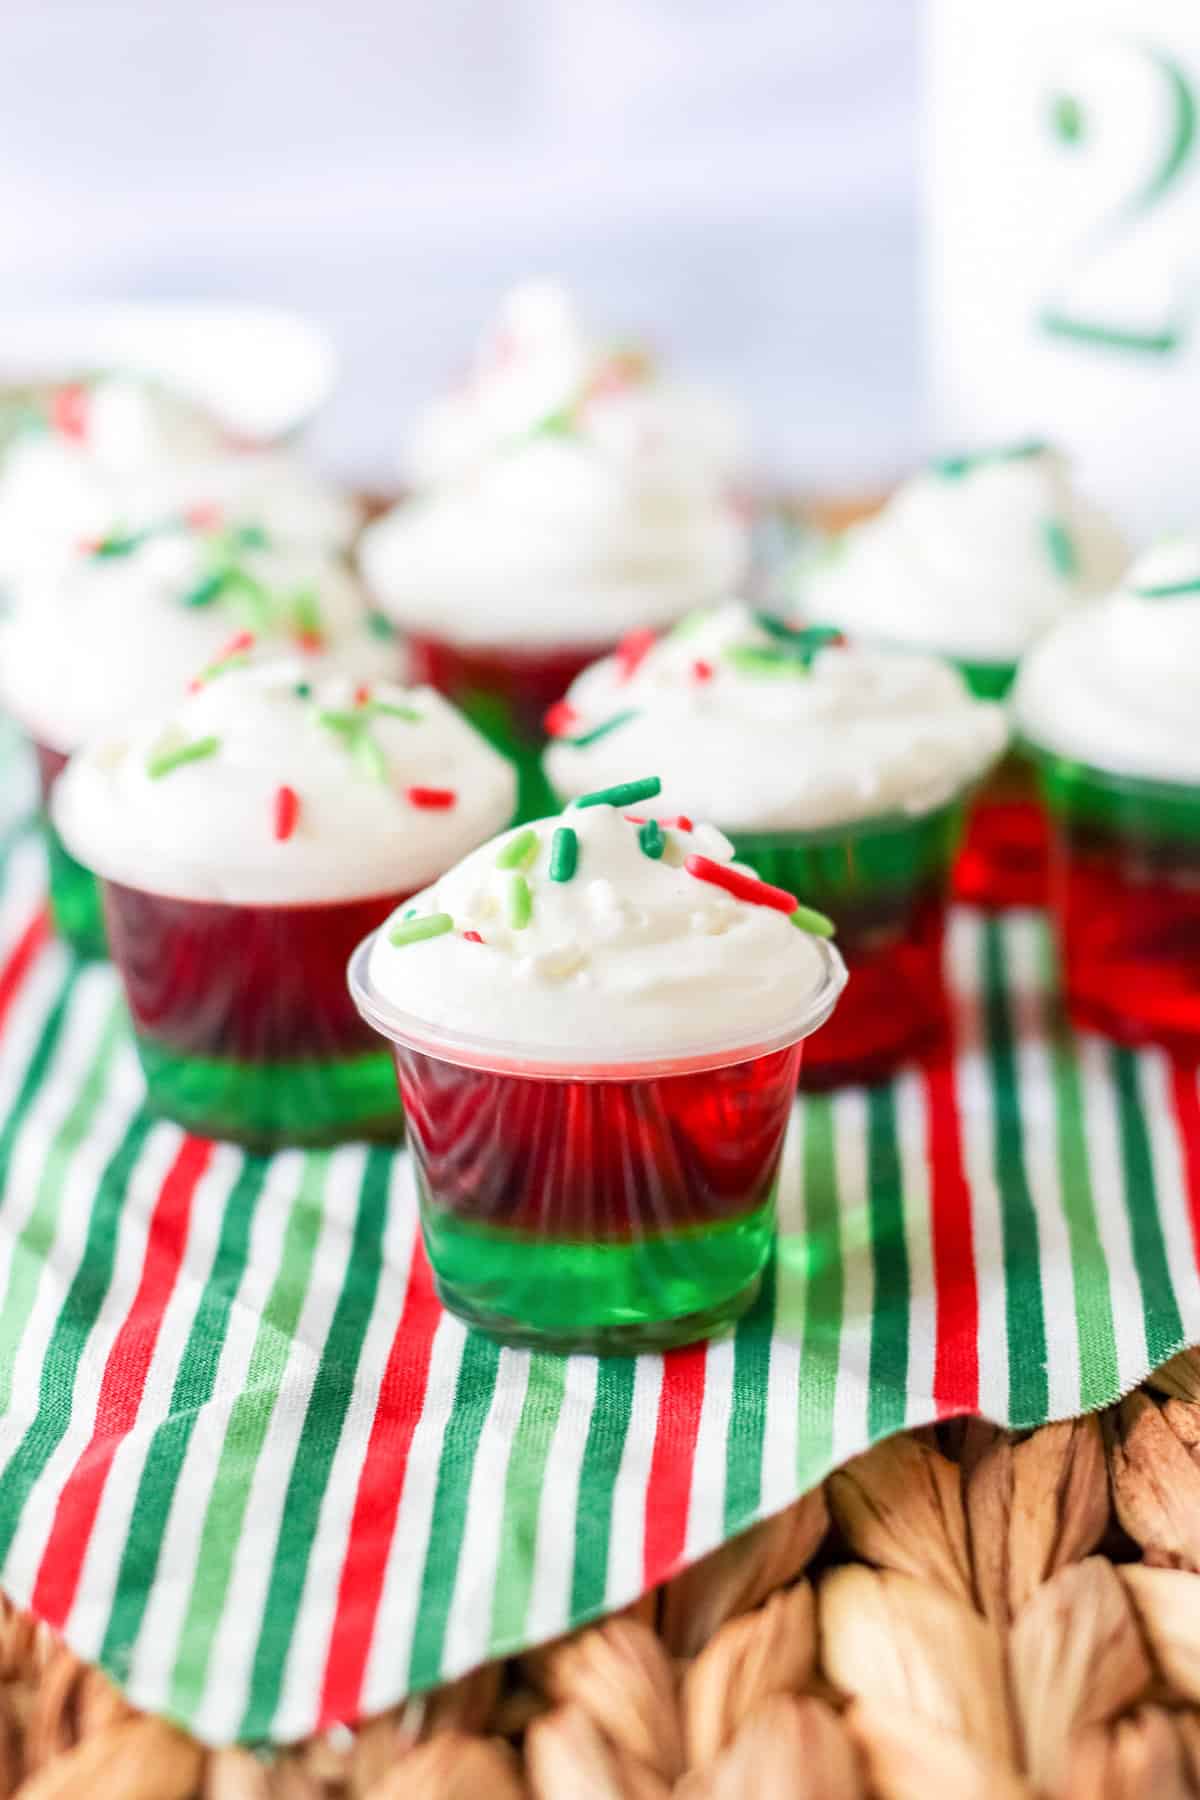 Layered Christmas jello shots topped with whipped cream and sprinkles on red and green striped napkin.